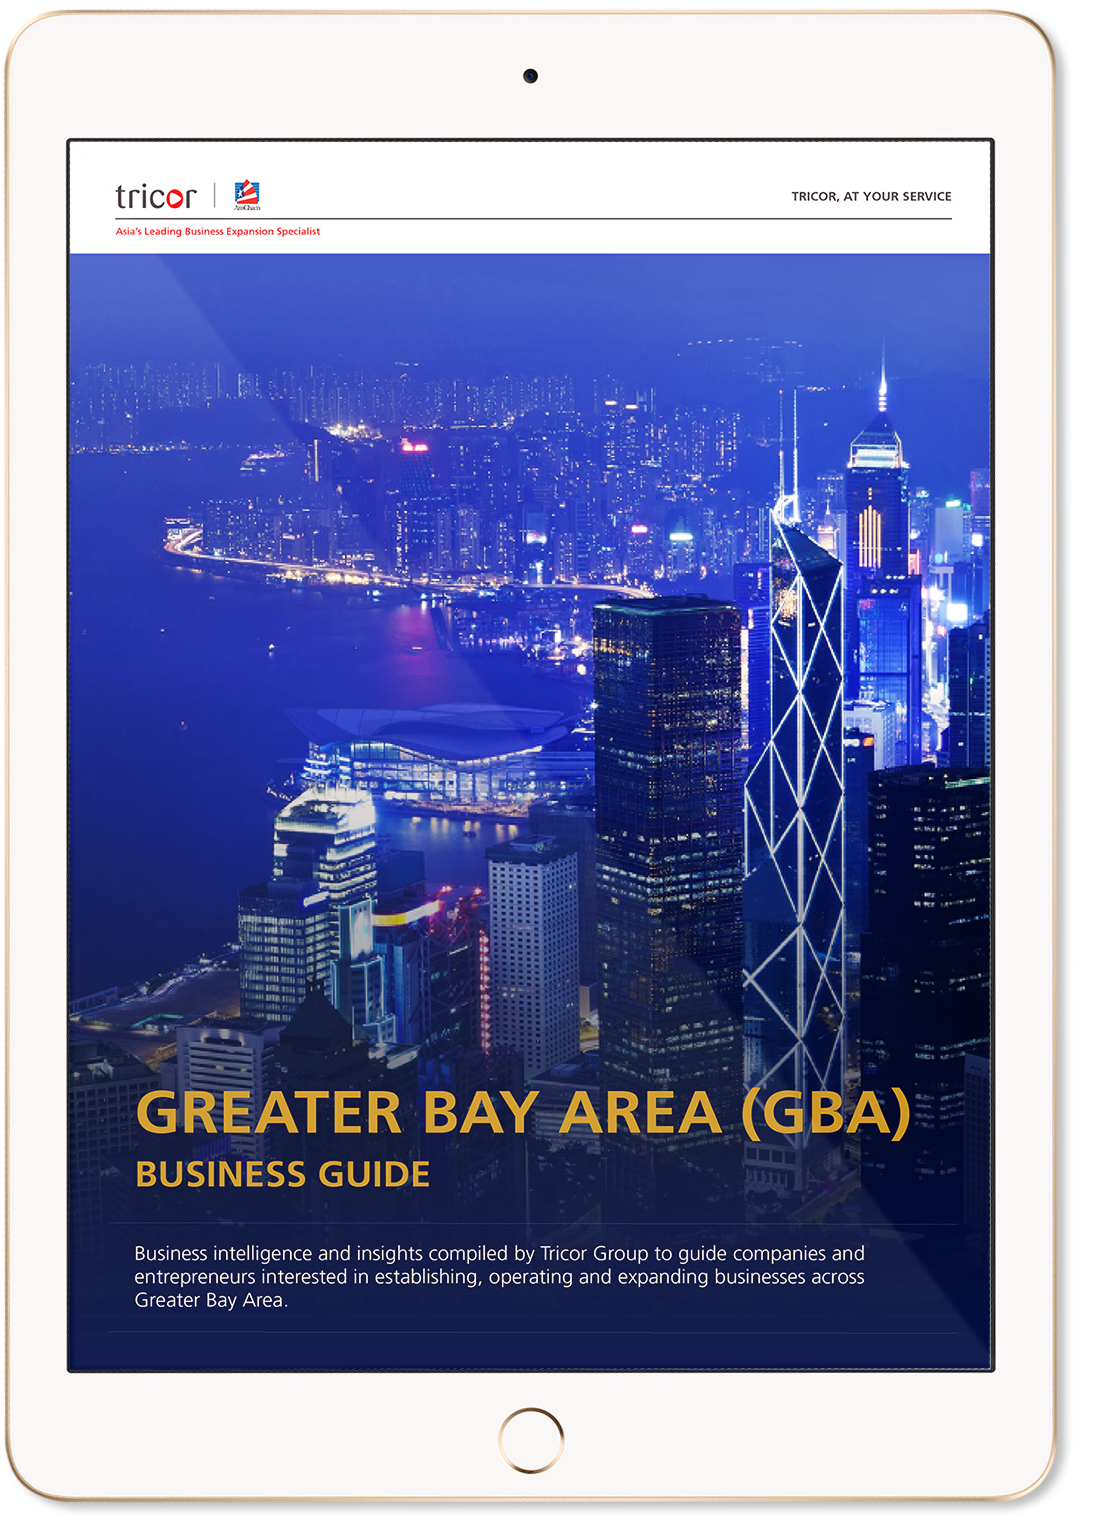 Doing business in the Greater Bay Area